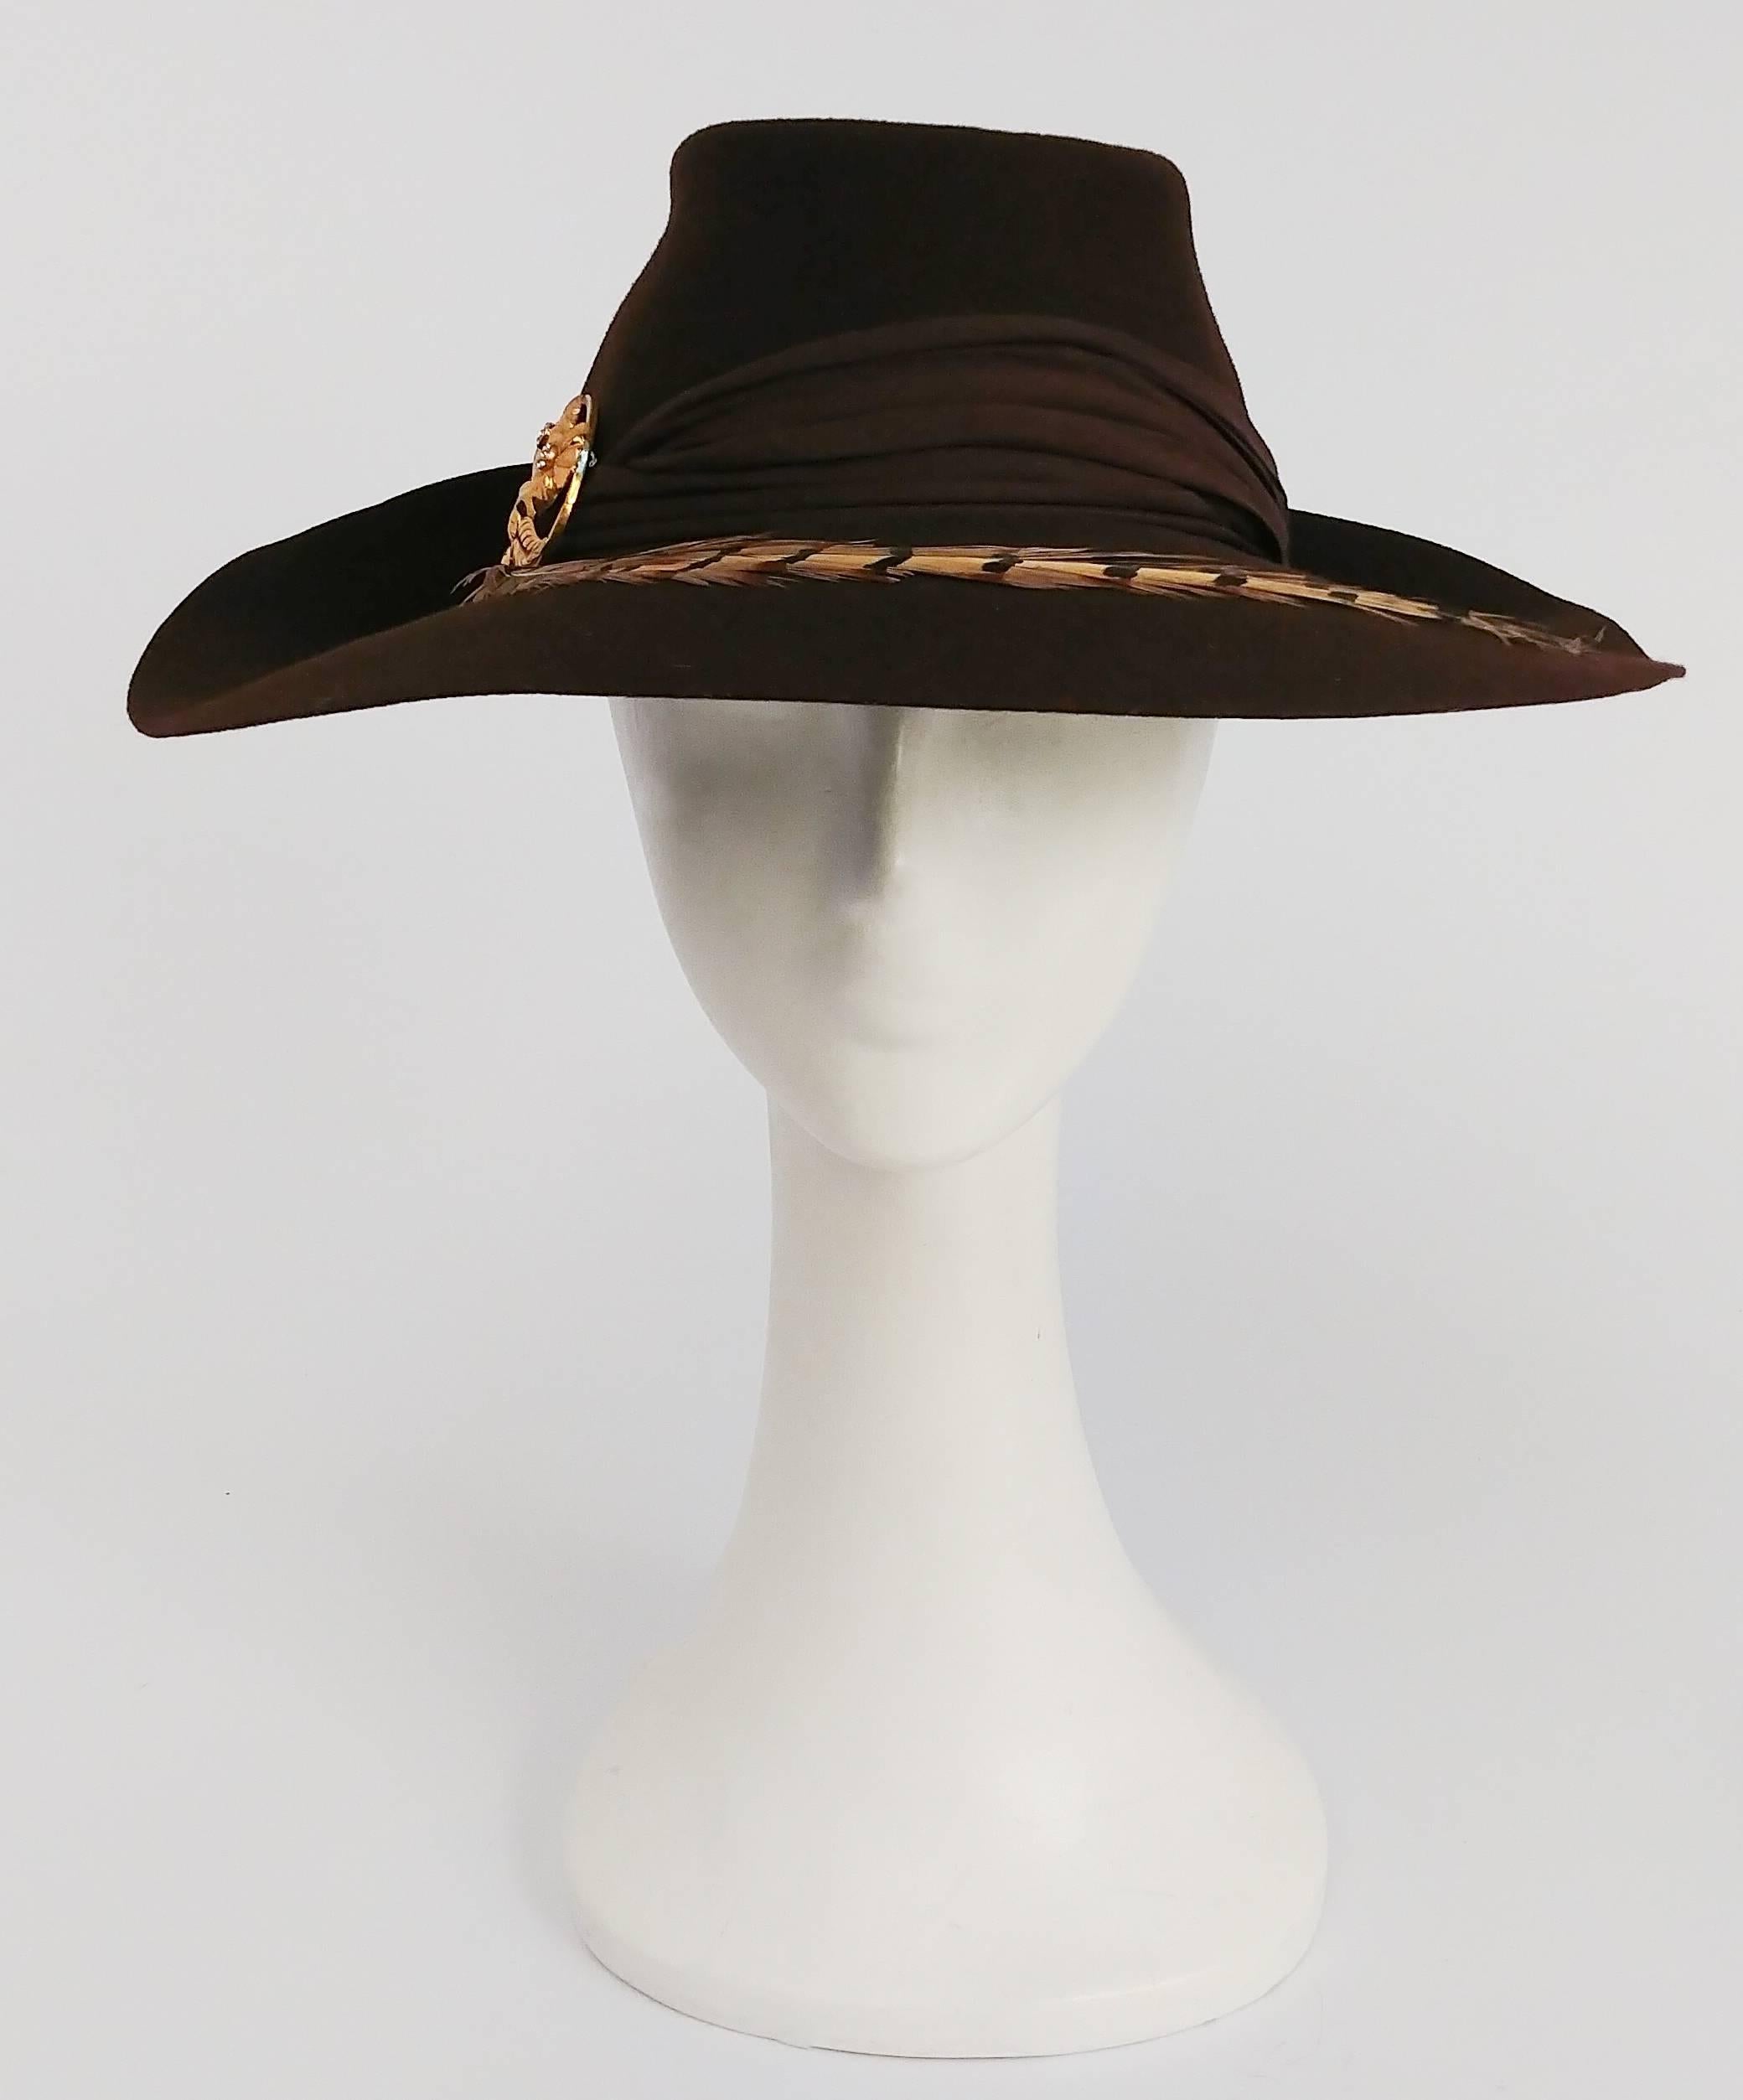 1940s Brown Large Brimmed Hat w/ Pheasant Feather. Brim is flipped up and gathered at back. Side embellishment of a gold-tone flower pin. Held in place with elastic band. 